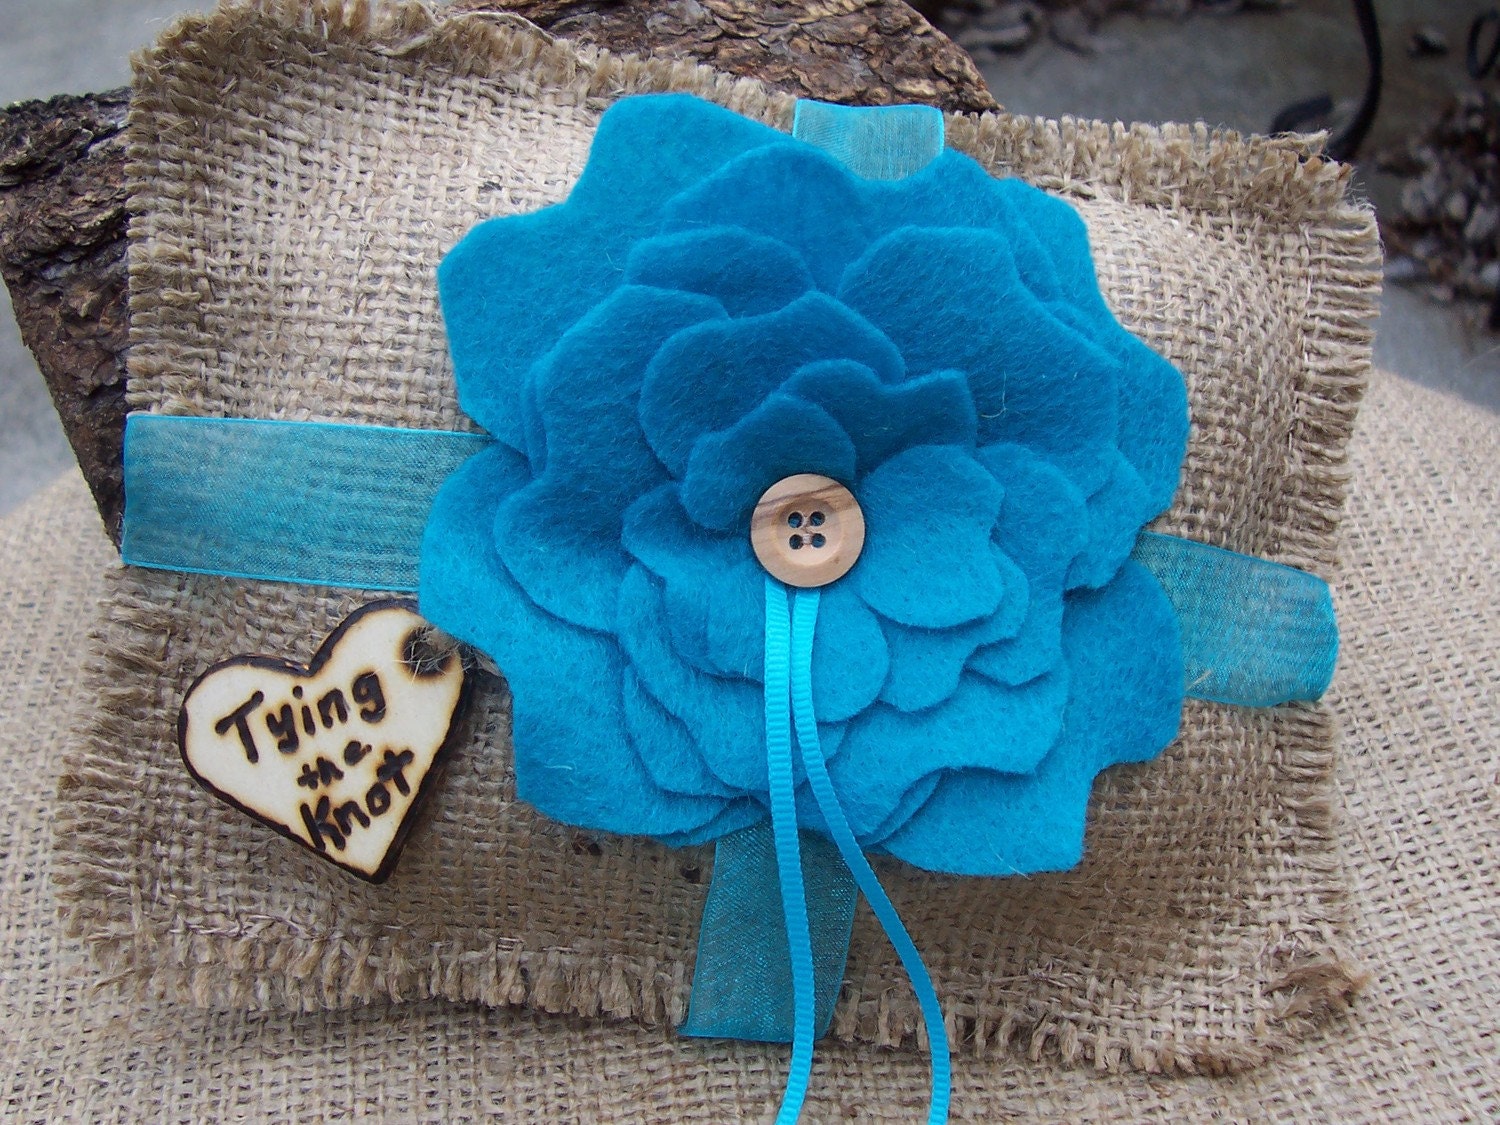 TYING THE KNOT... Rustic Burlap Ring Bearer Pillow with Felt Flower and Personalized Wood Heart